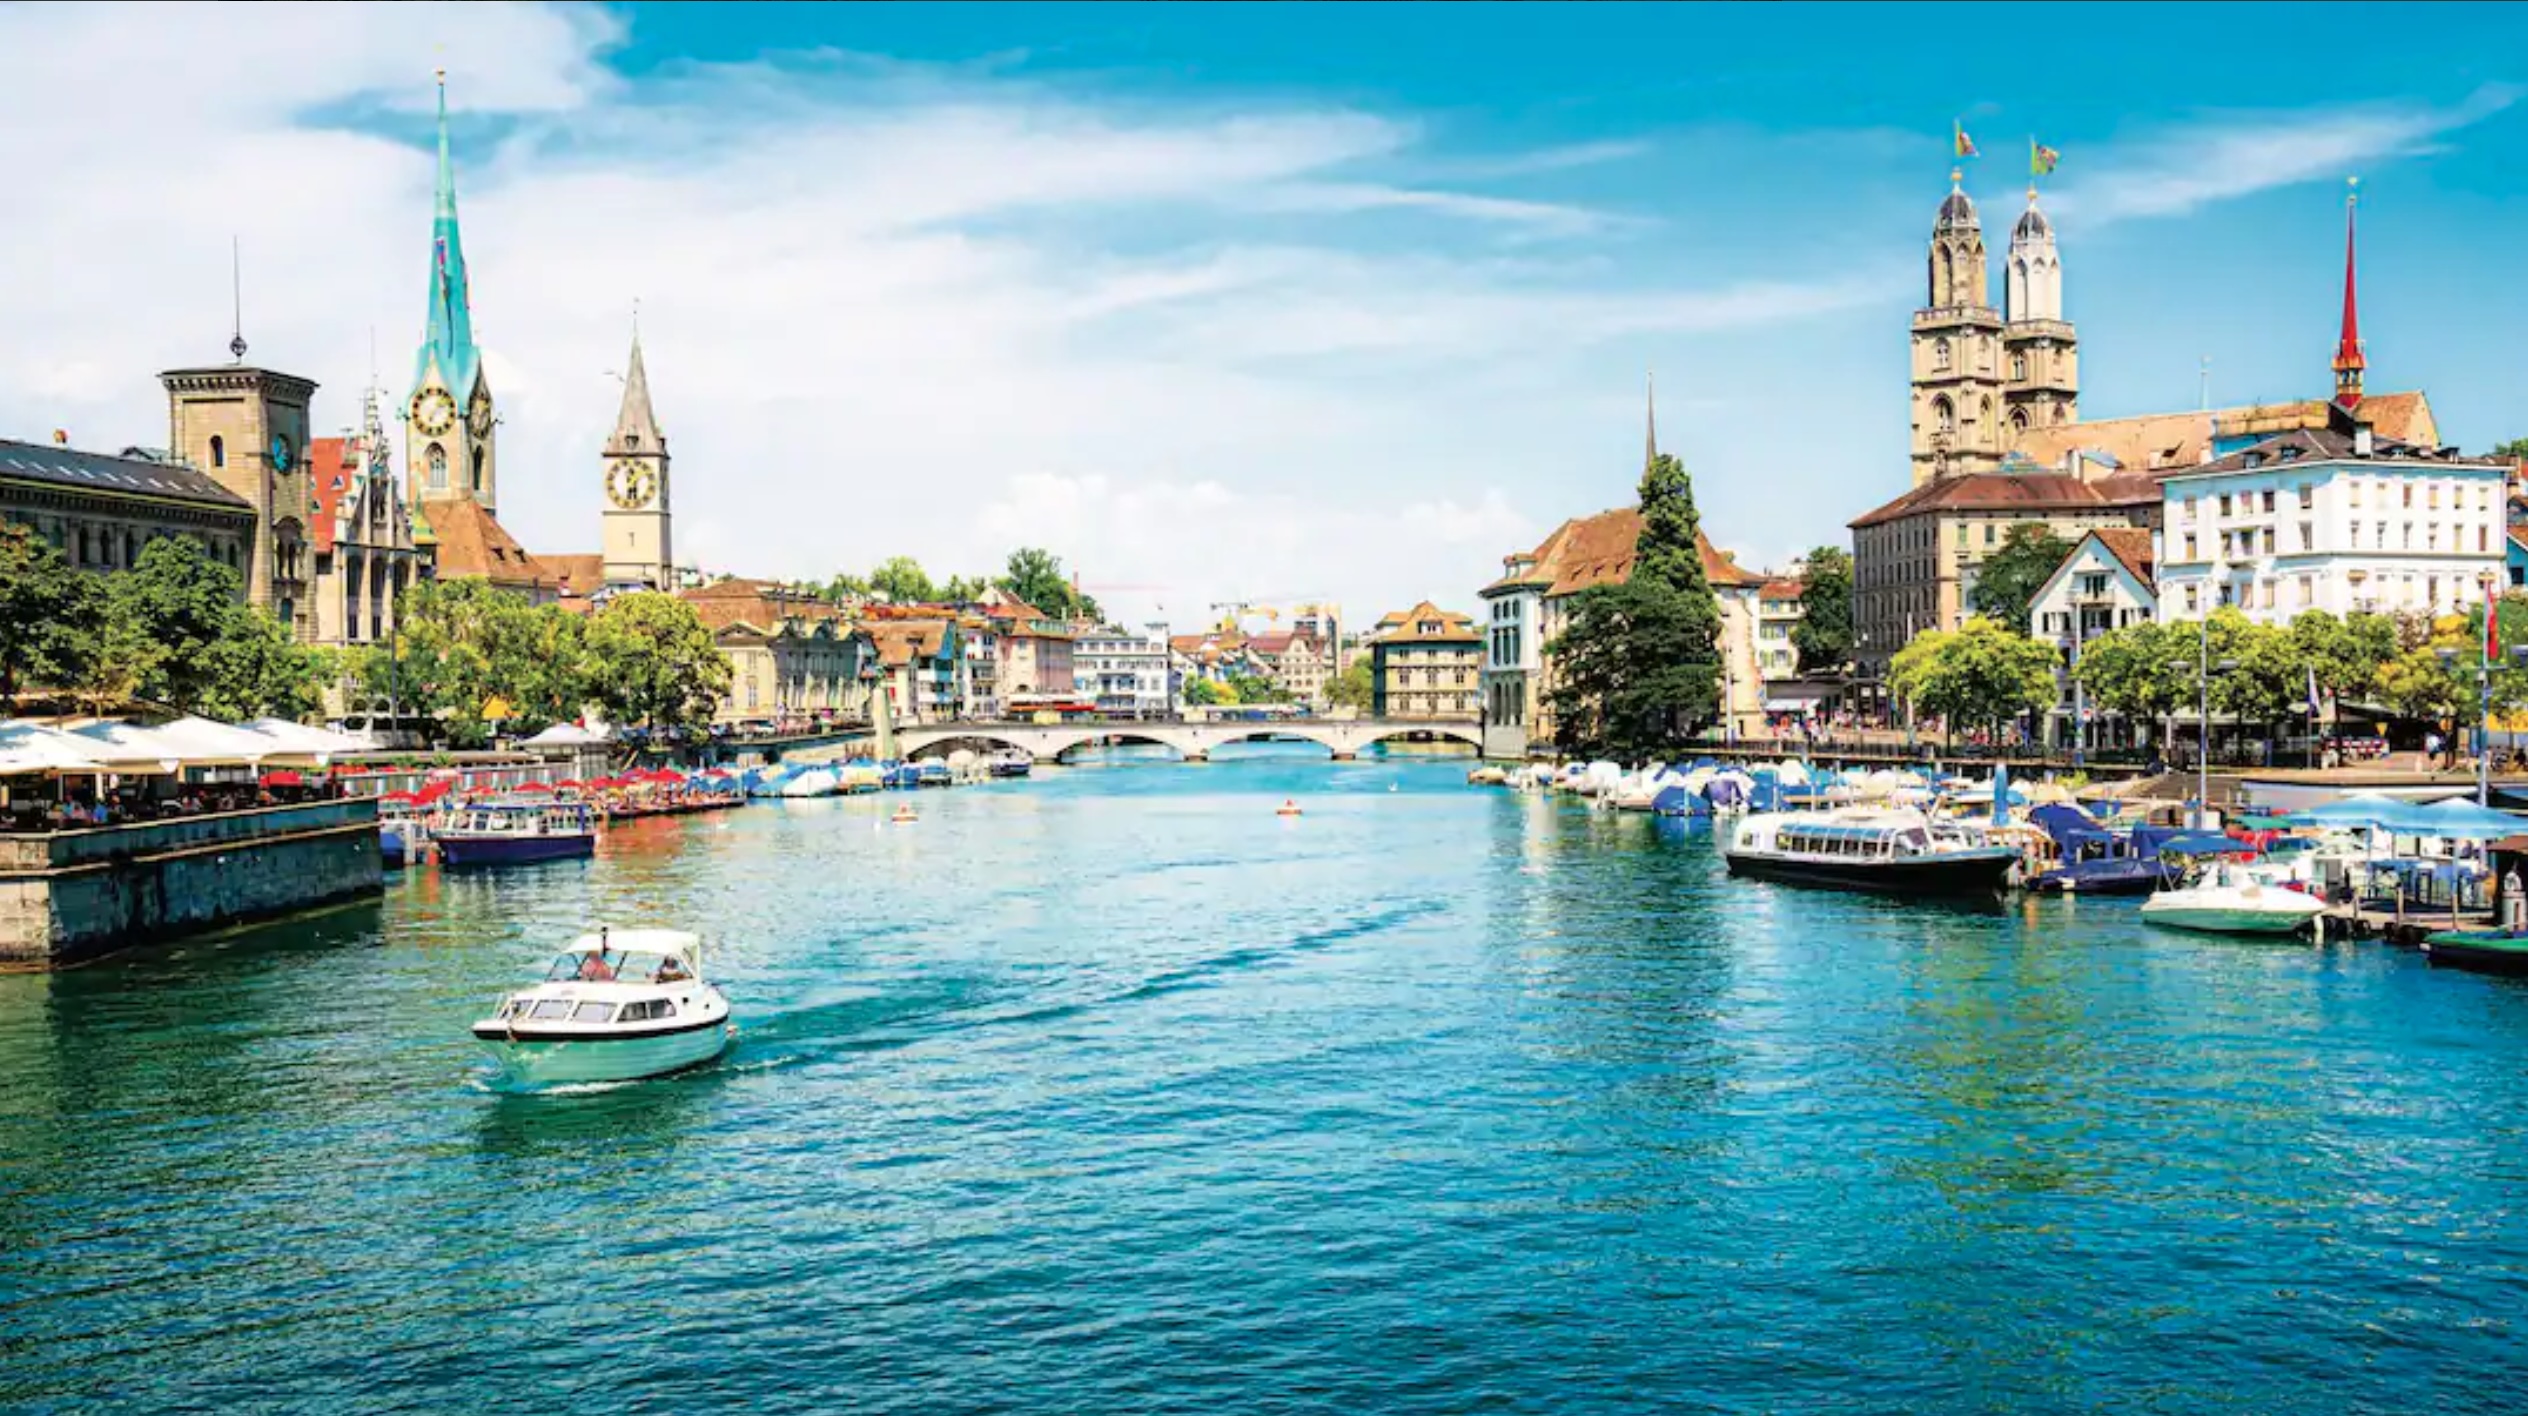 boats on Limmat River in Zurich